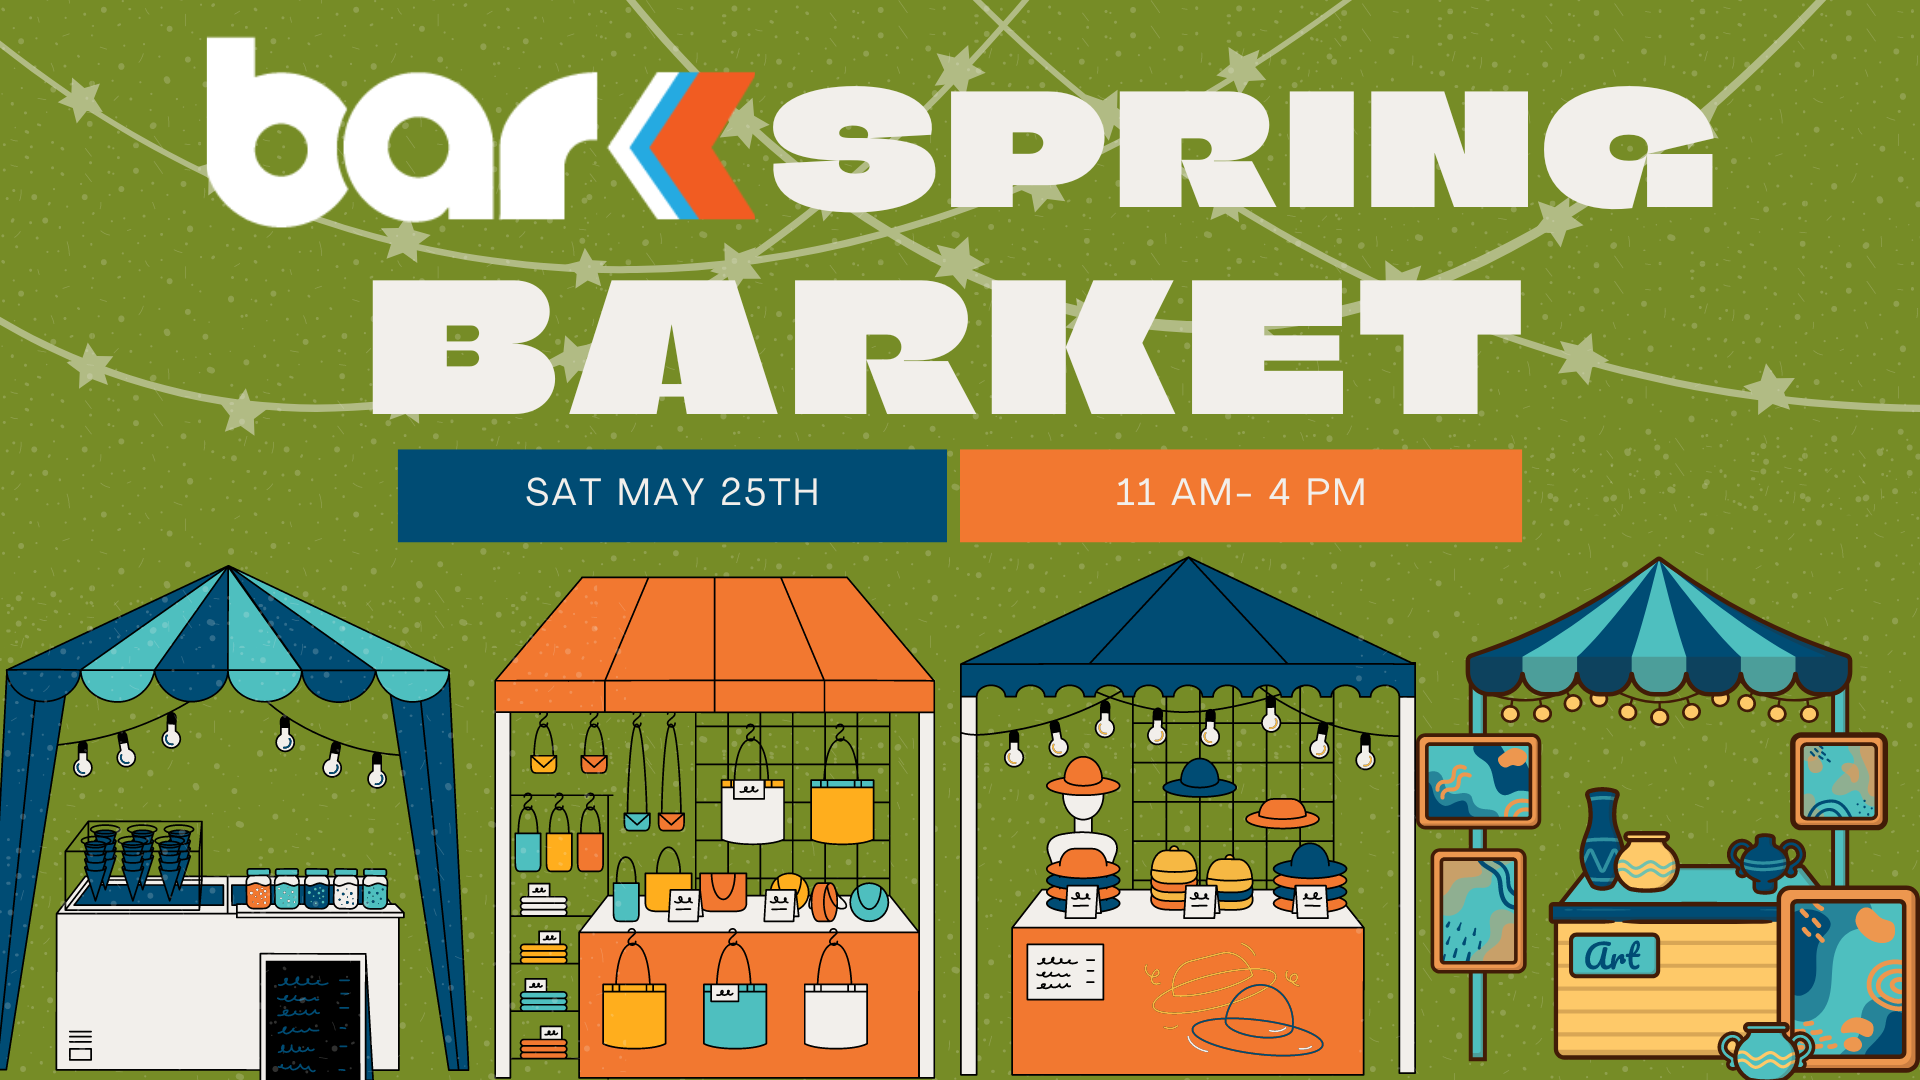 Bar K spring barket on sat may 25th from 11 am to 4 pm